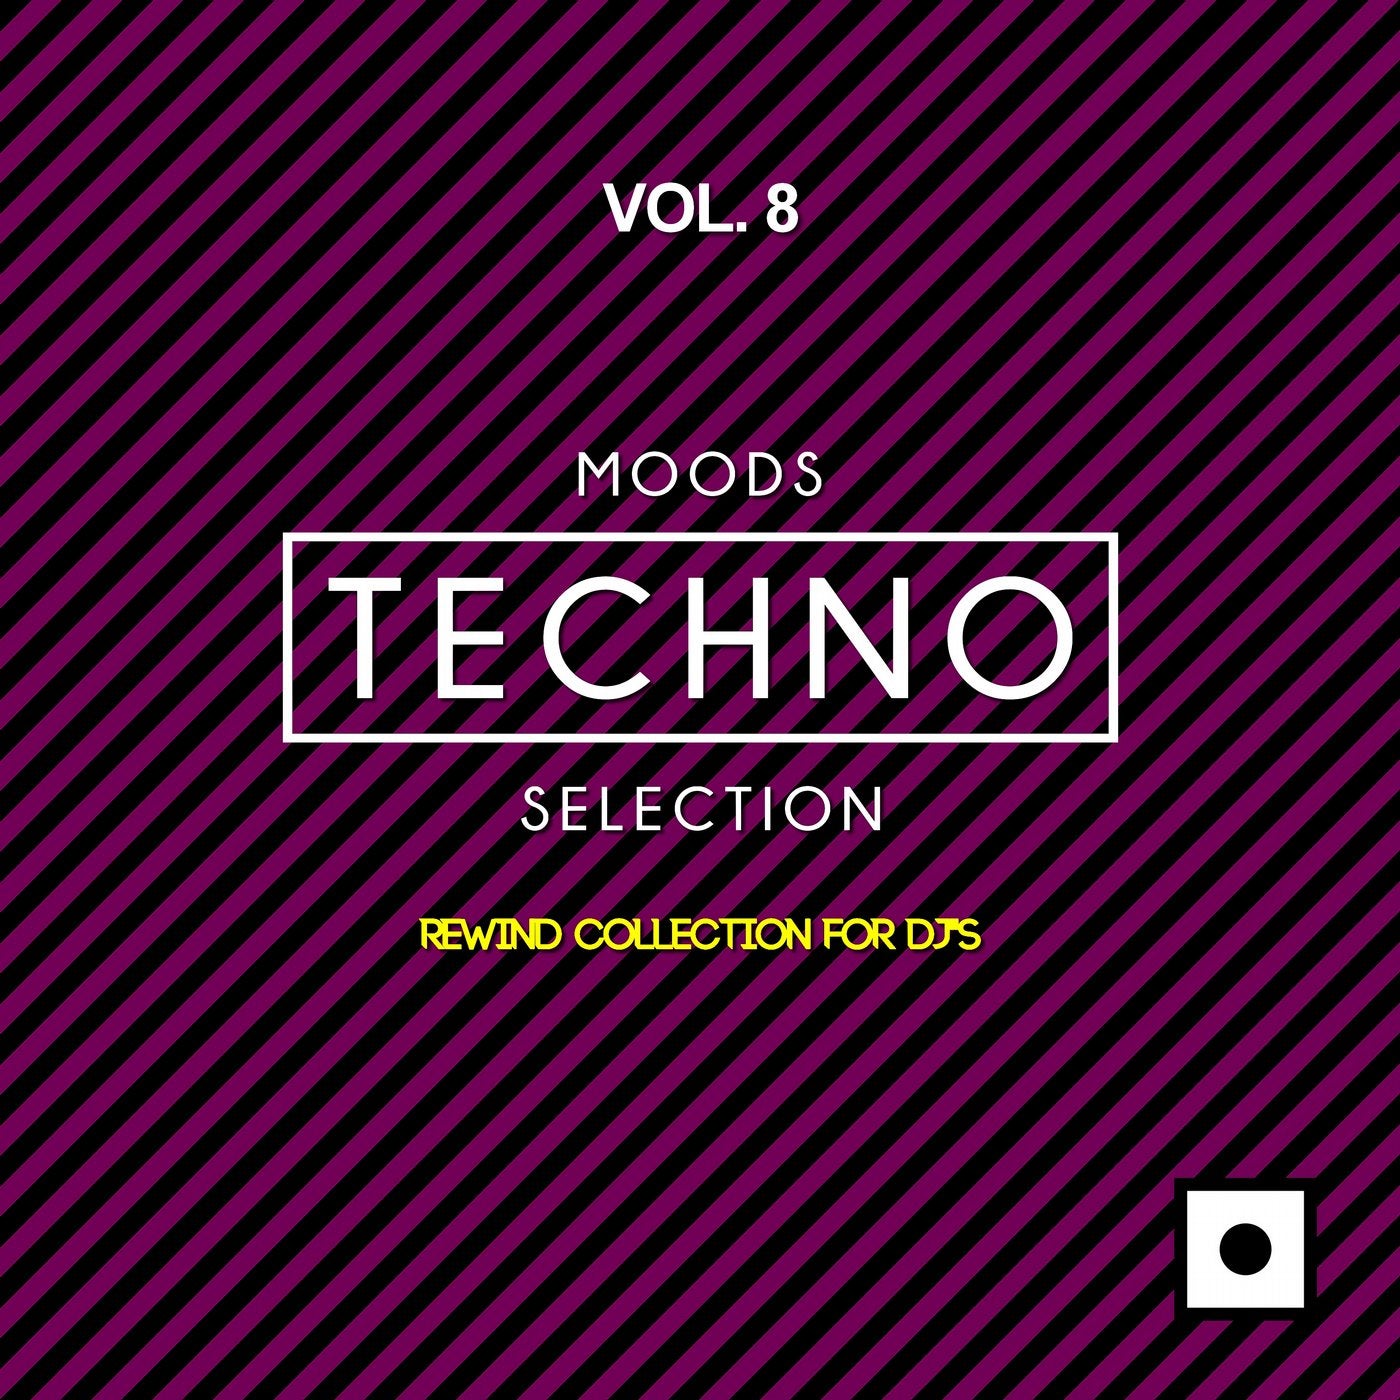 Moods Techno Selection, Vol. 8 (Rewind Collection For DJ's)